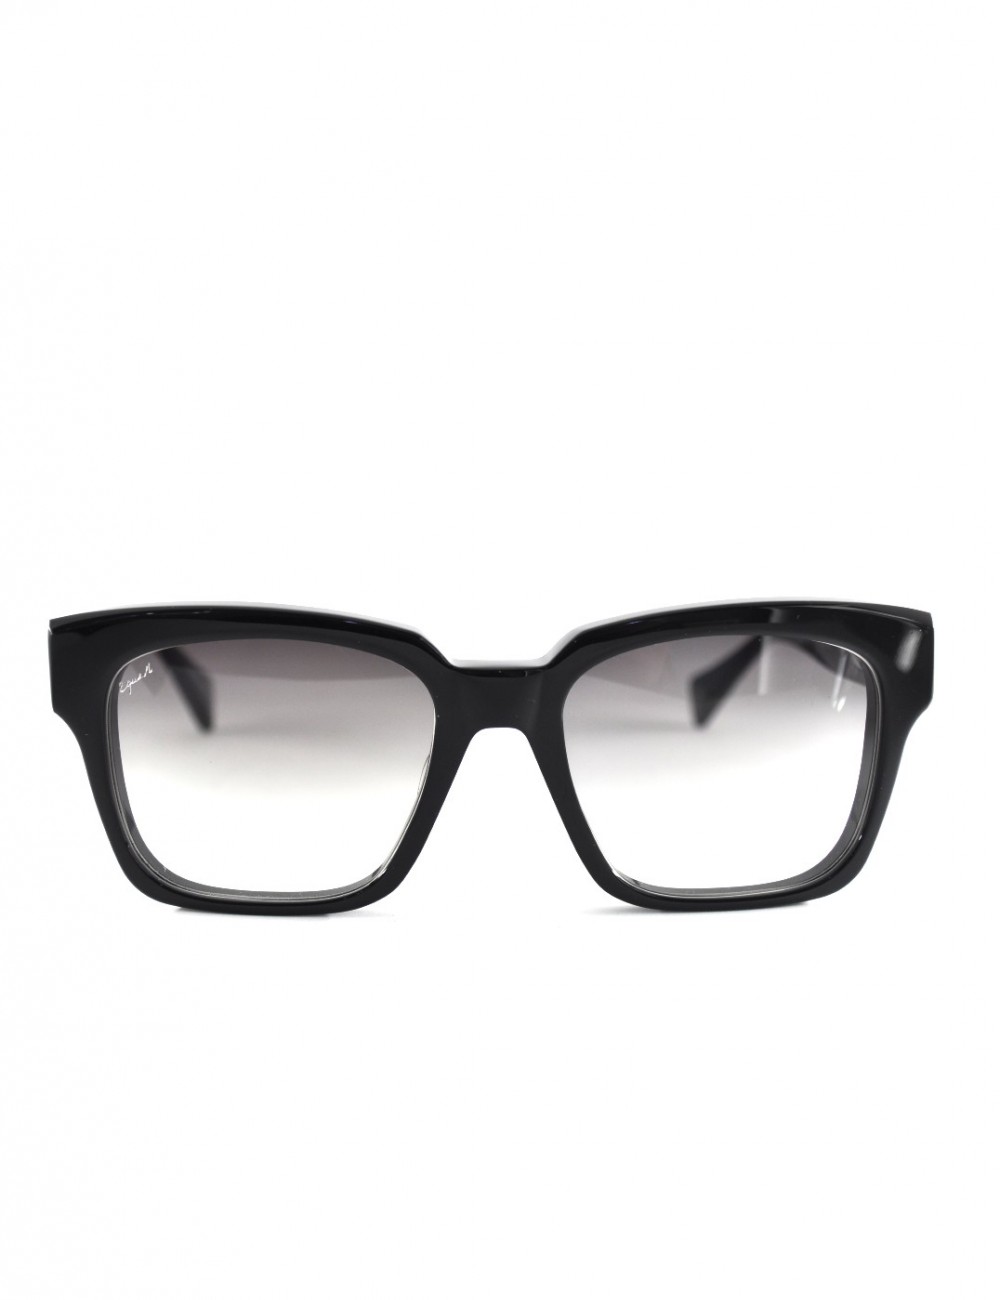 Eque.M Eque.M The Voice abs  EyewearShop Online